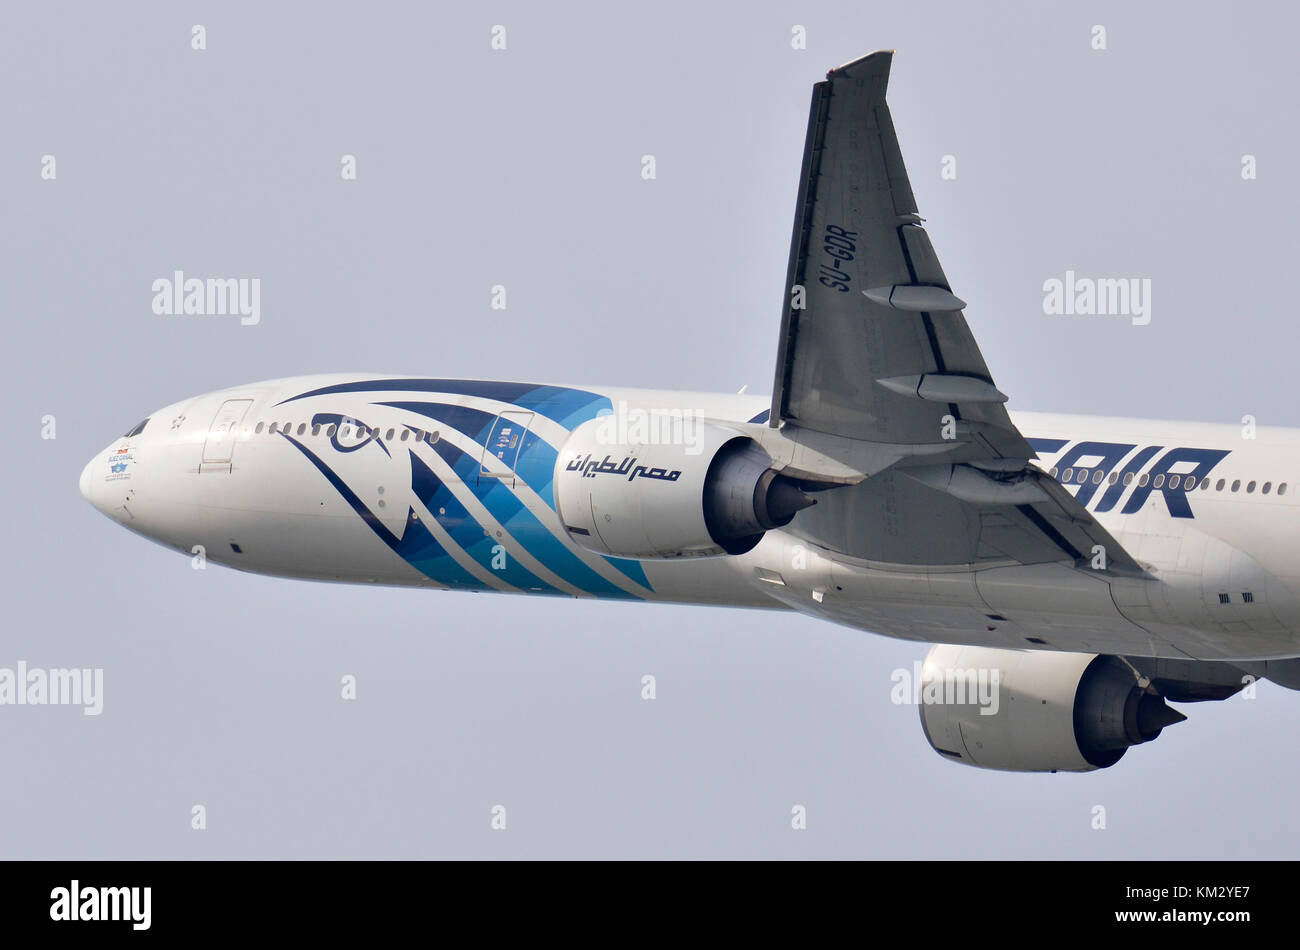 EgyptAir Boeing 777 plane with Ibis logo, Heathrow Airport, UK. Boeing 777-36N SU-GDR is seen climbing out after take-off. Stock Photo